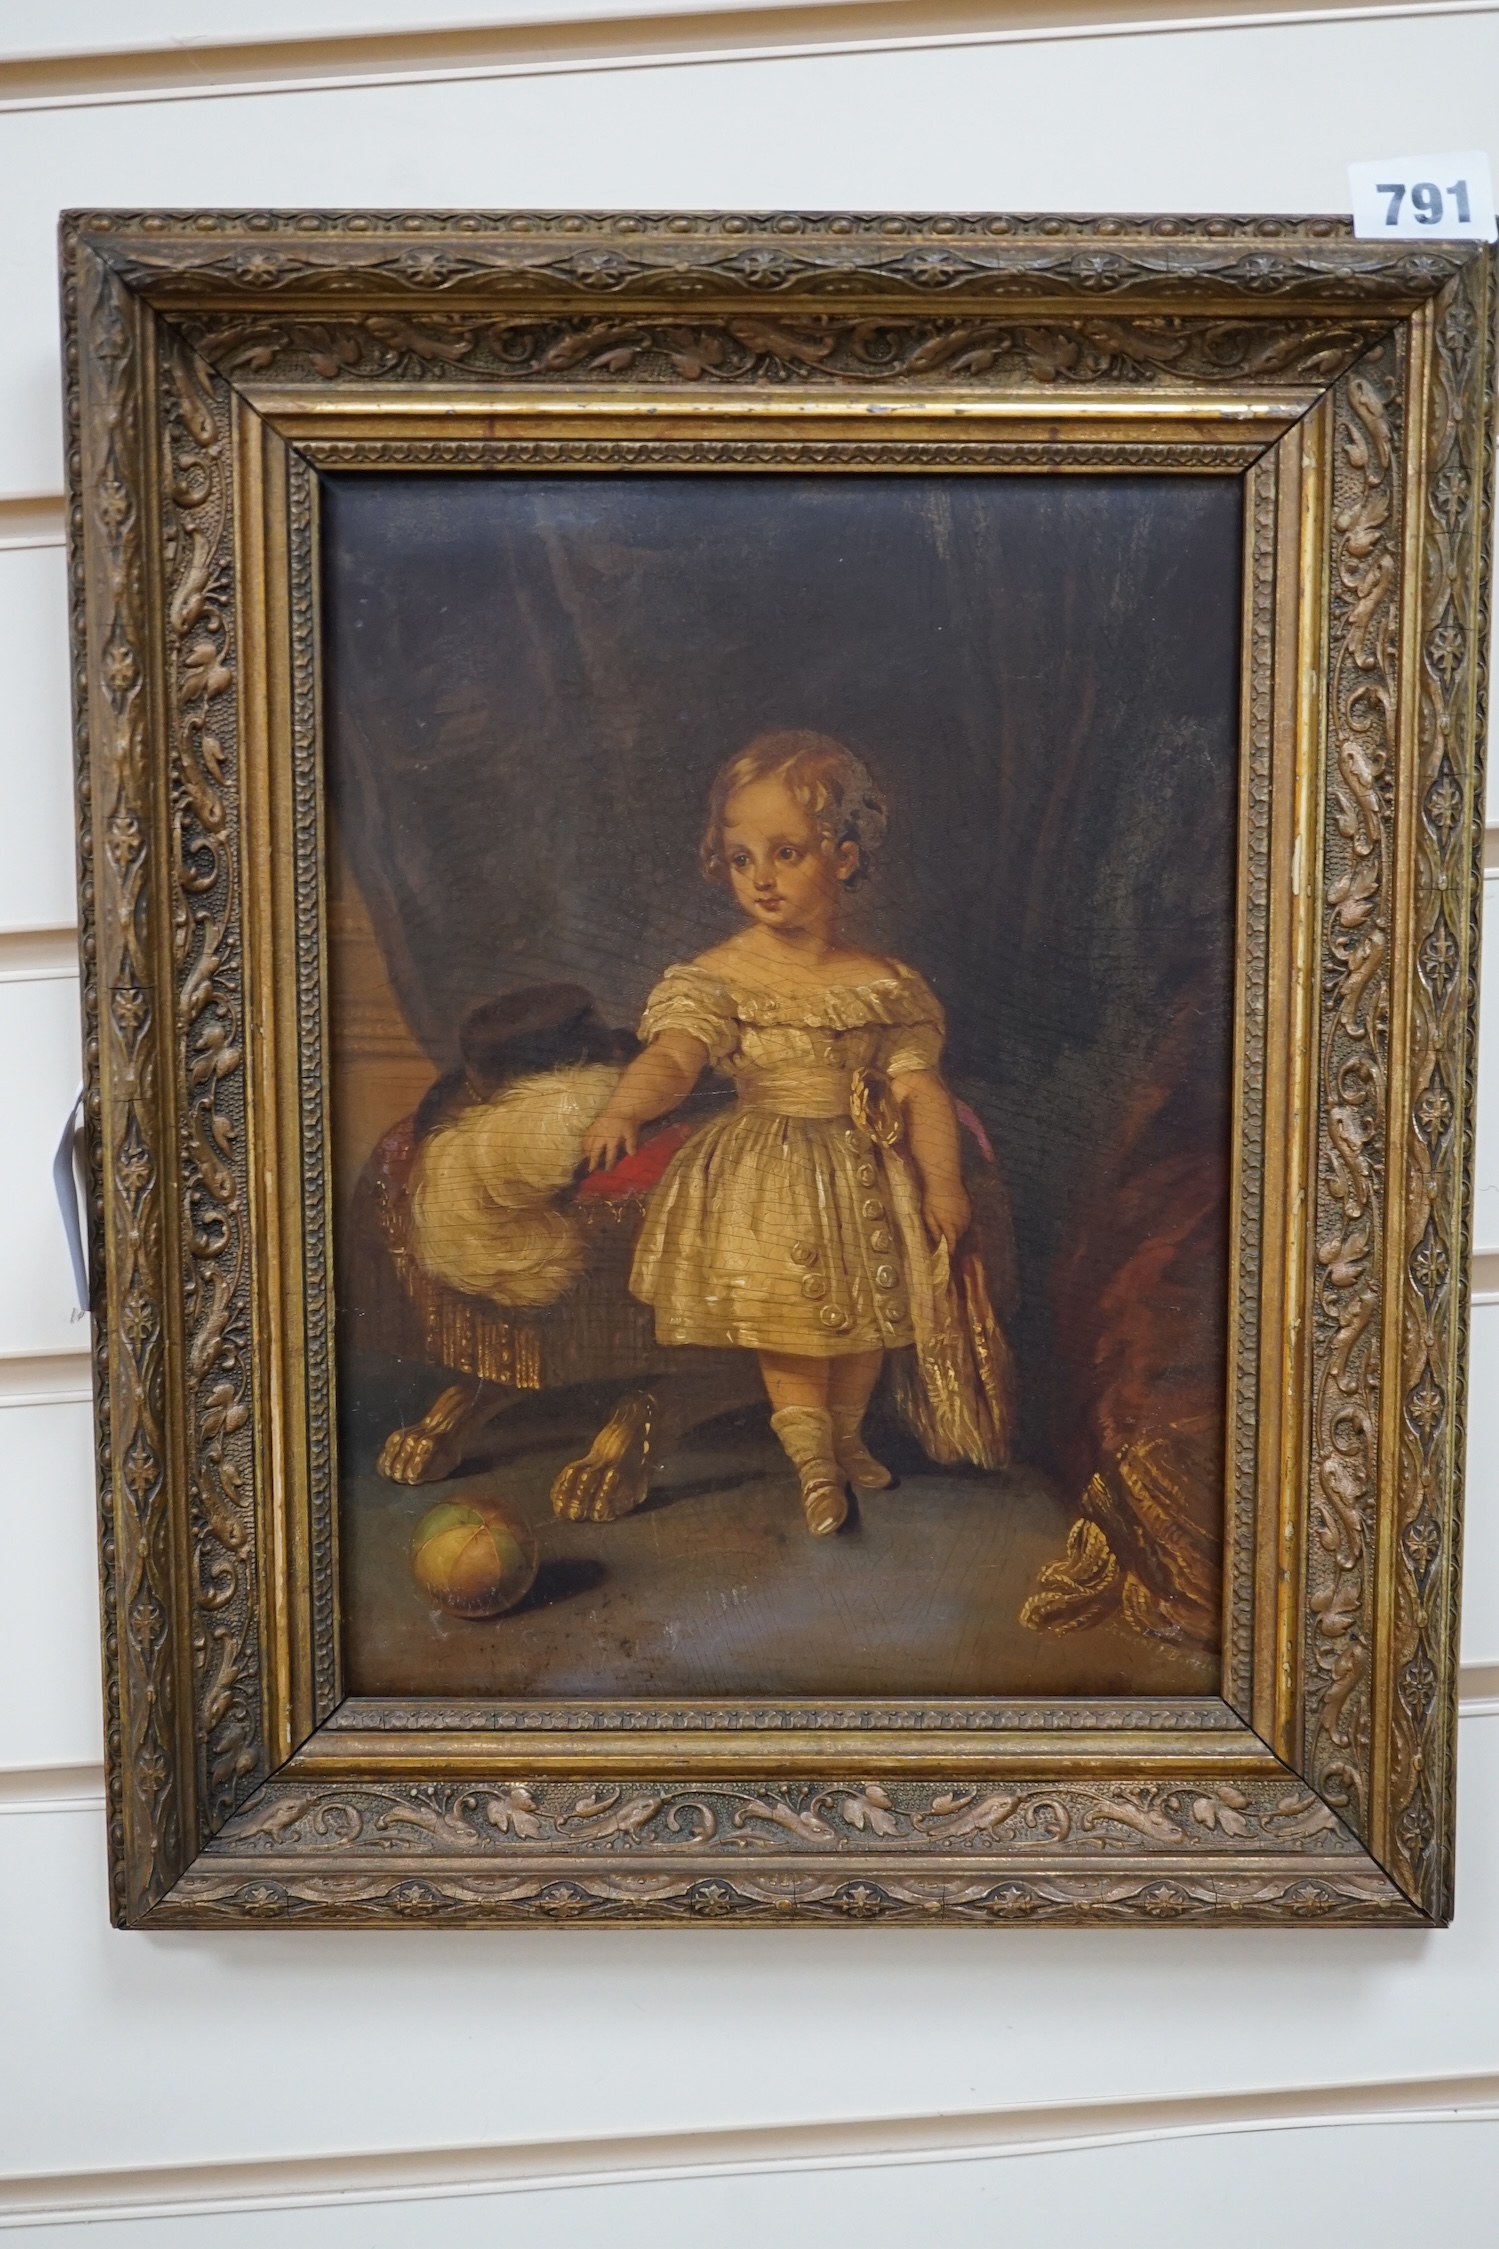 A Jennens and Bettridge papier mache panel, Prince of Wales, The Future King Edward VII, 28 x 20cm. Condition - poor to fair